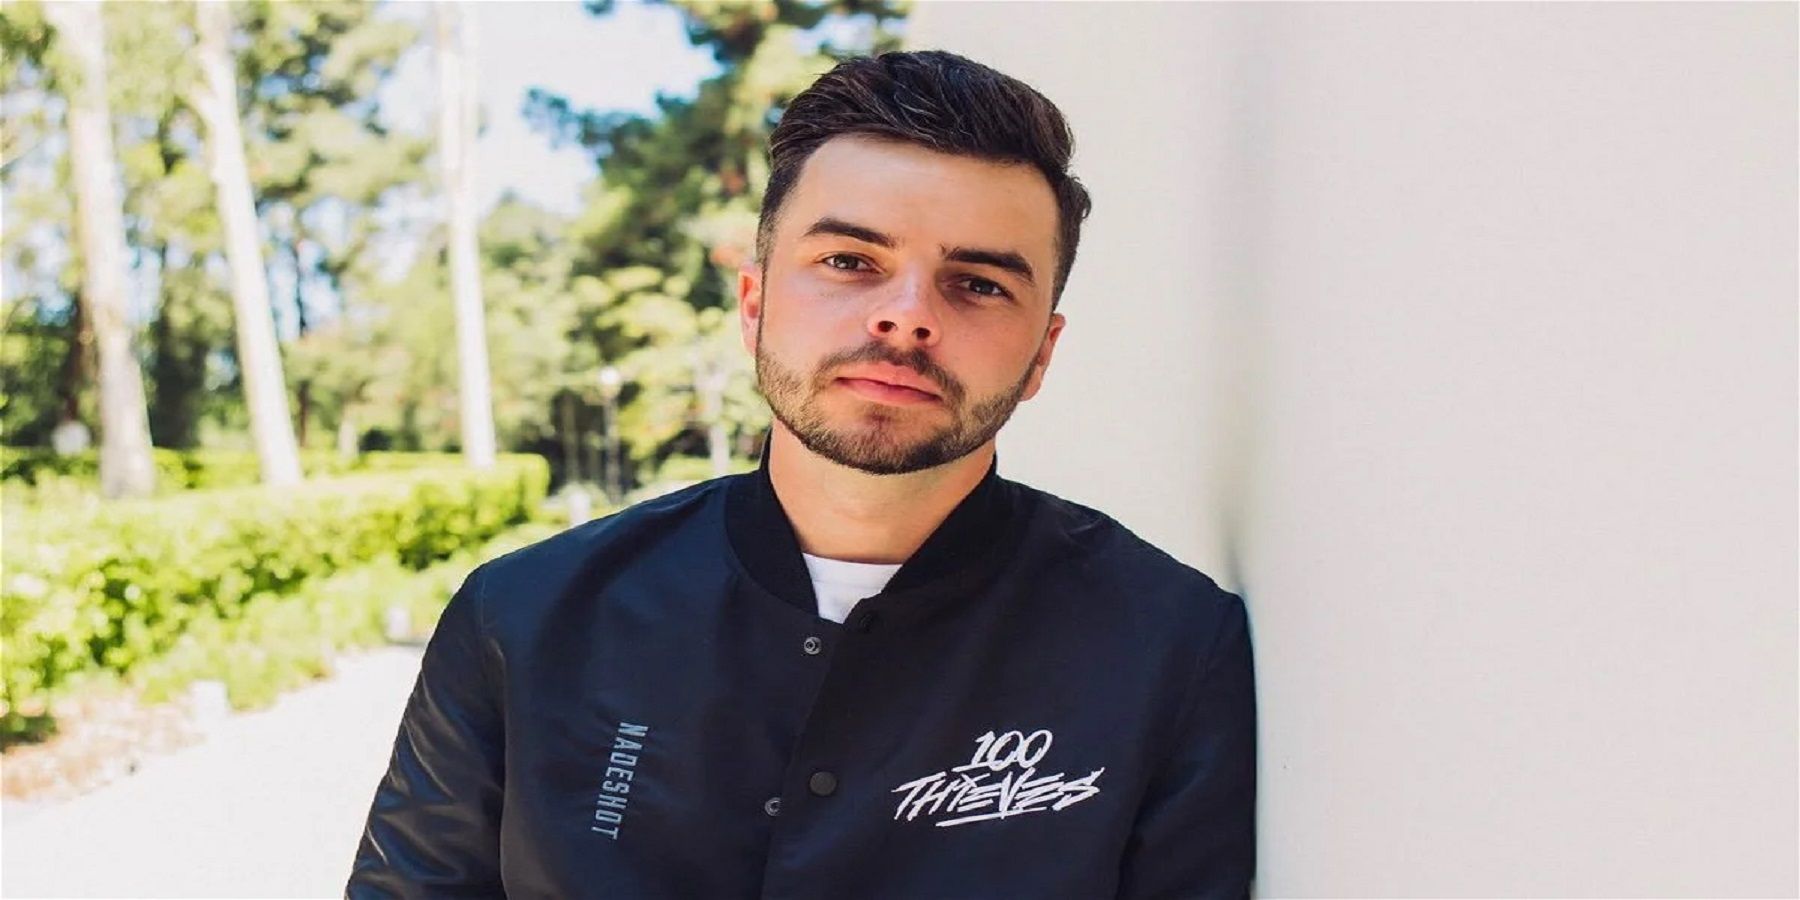 100 Thieves founder and former Call of Duty pro player Nadeshot has some thoughts about the hate Modern Warfare 2 has been getting.